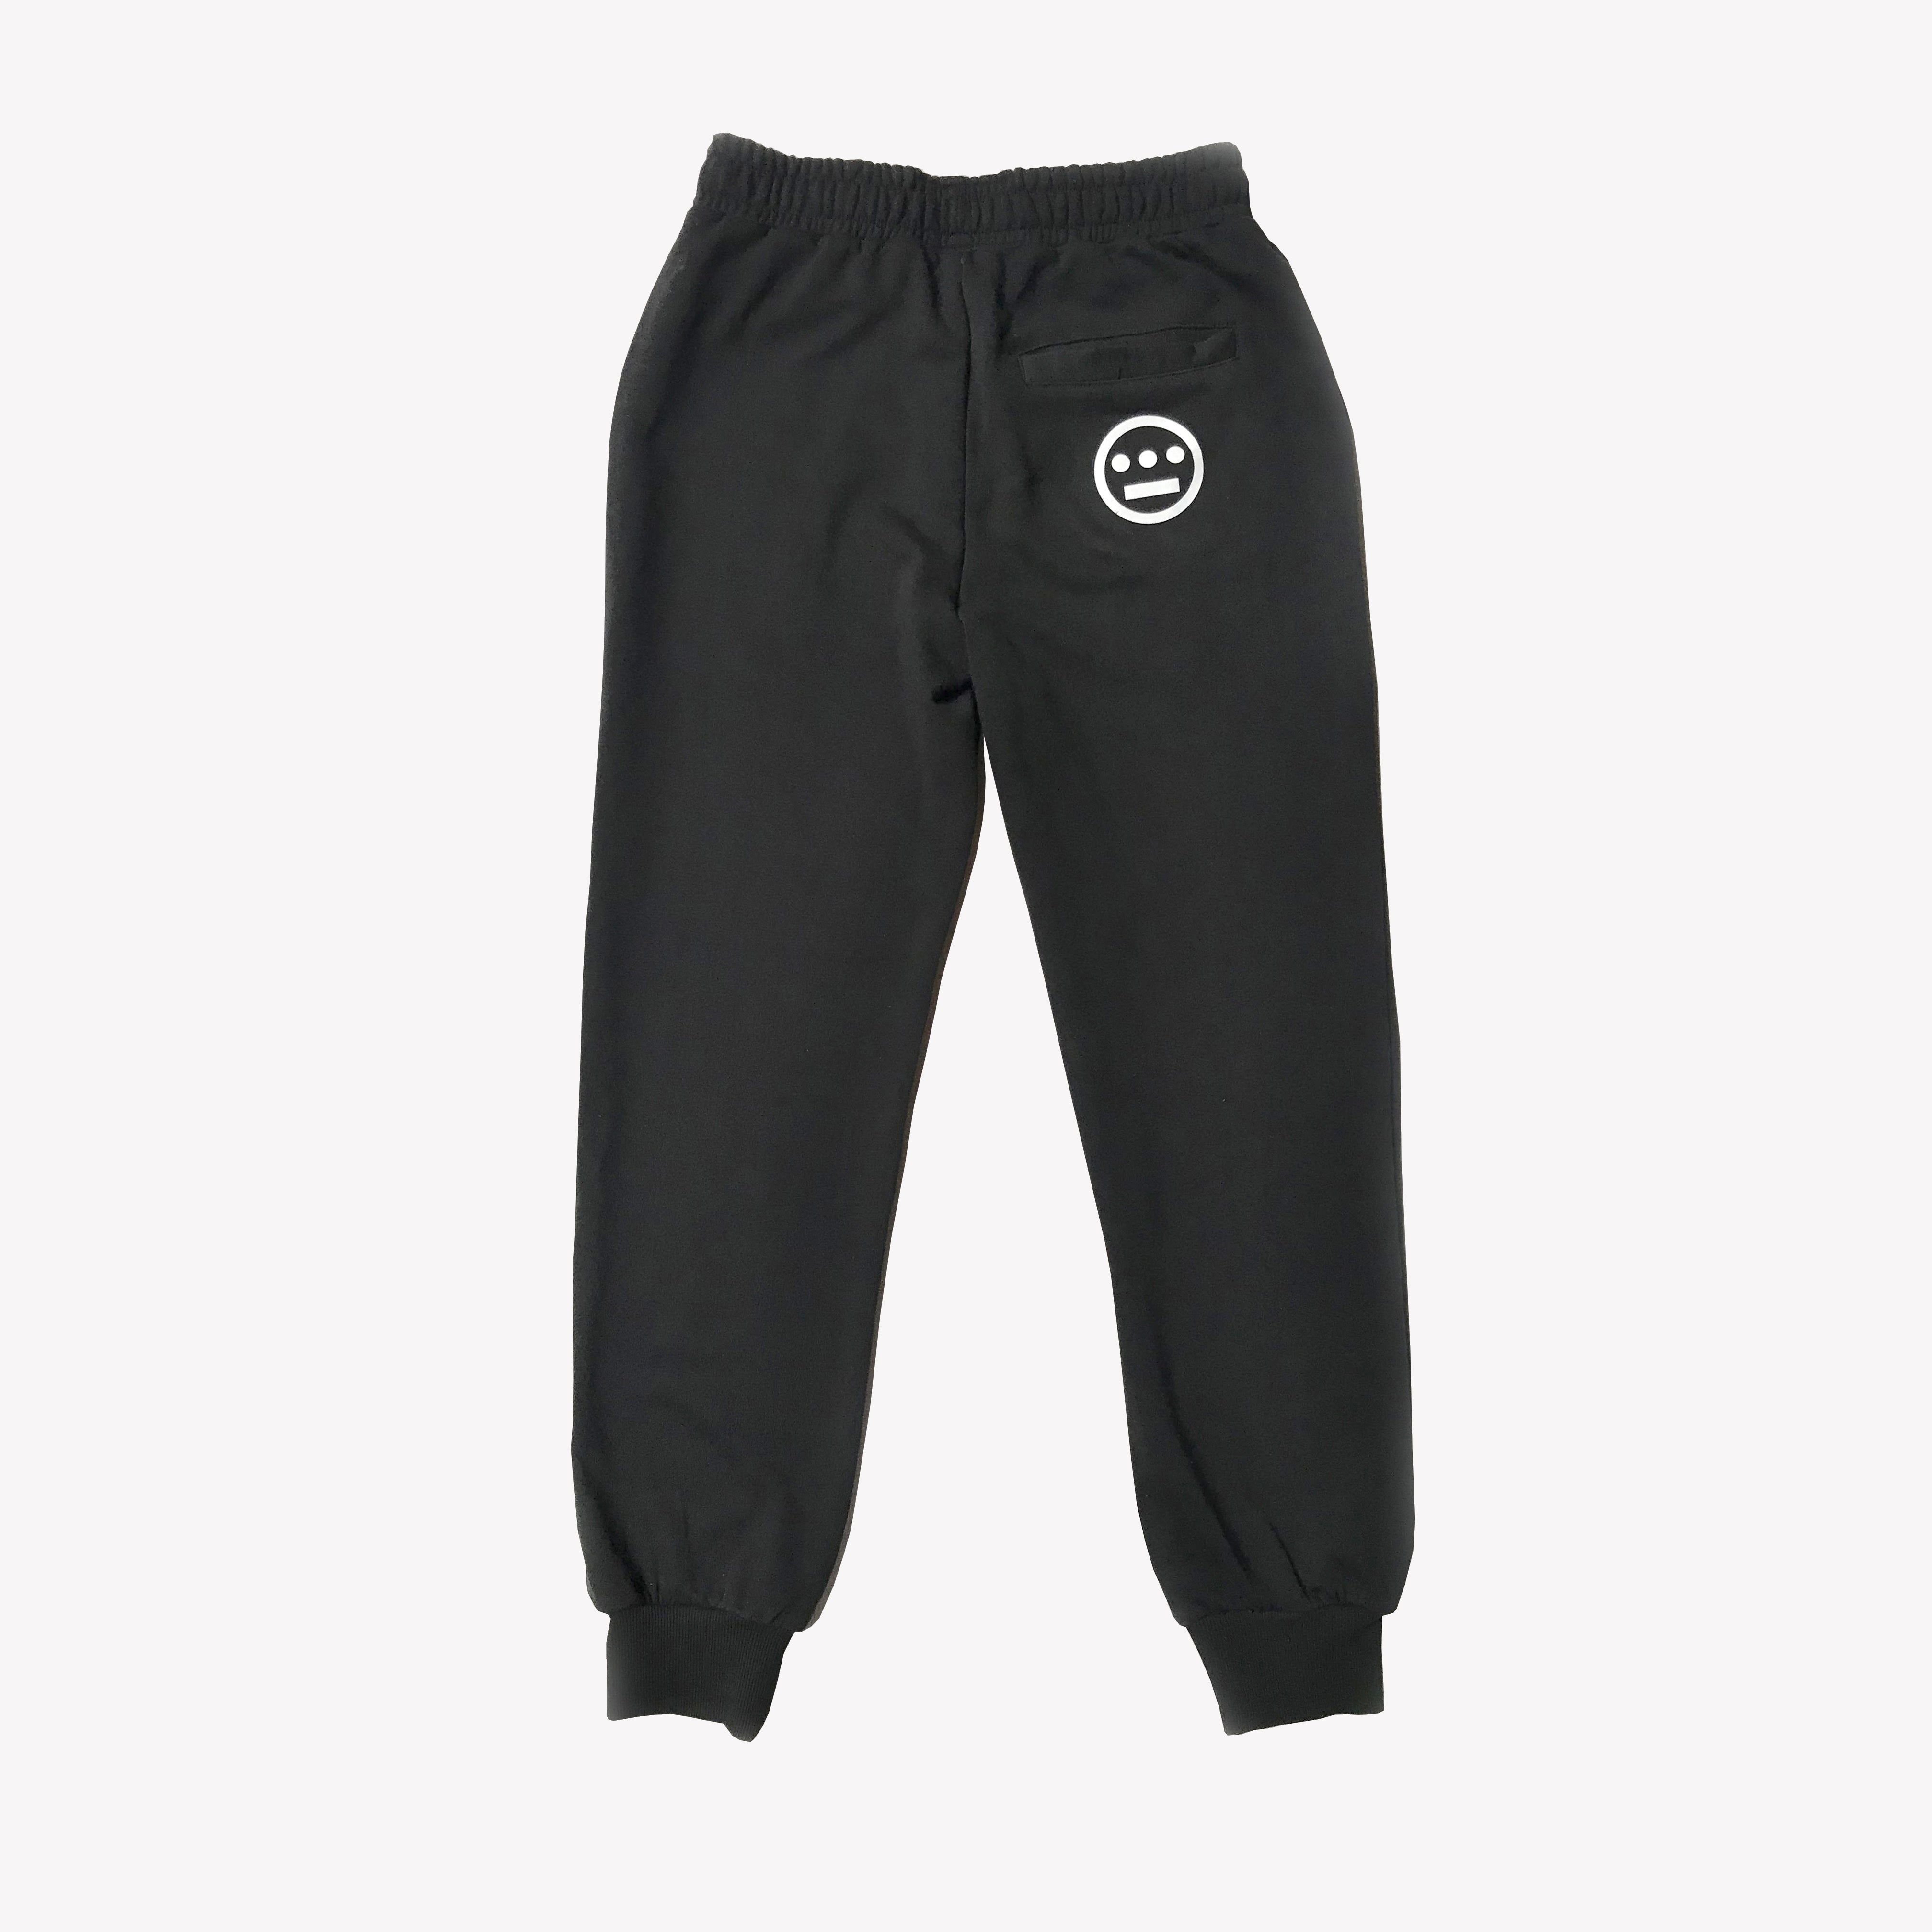 Back side of black joggers with round Hieroglyphics hip-hop logo on right wear side hip.